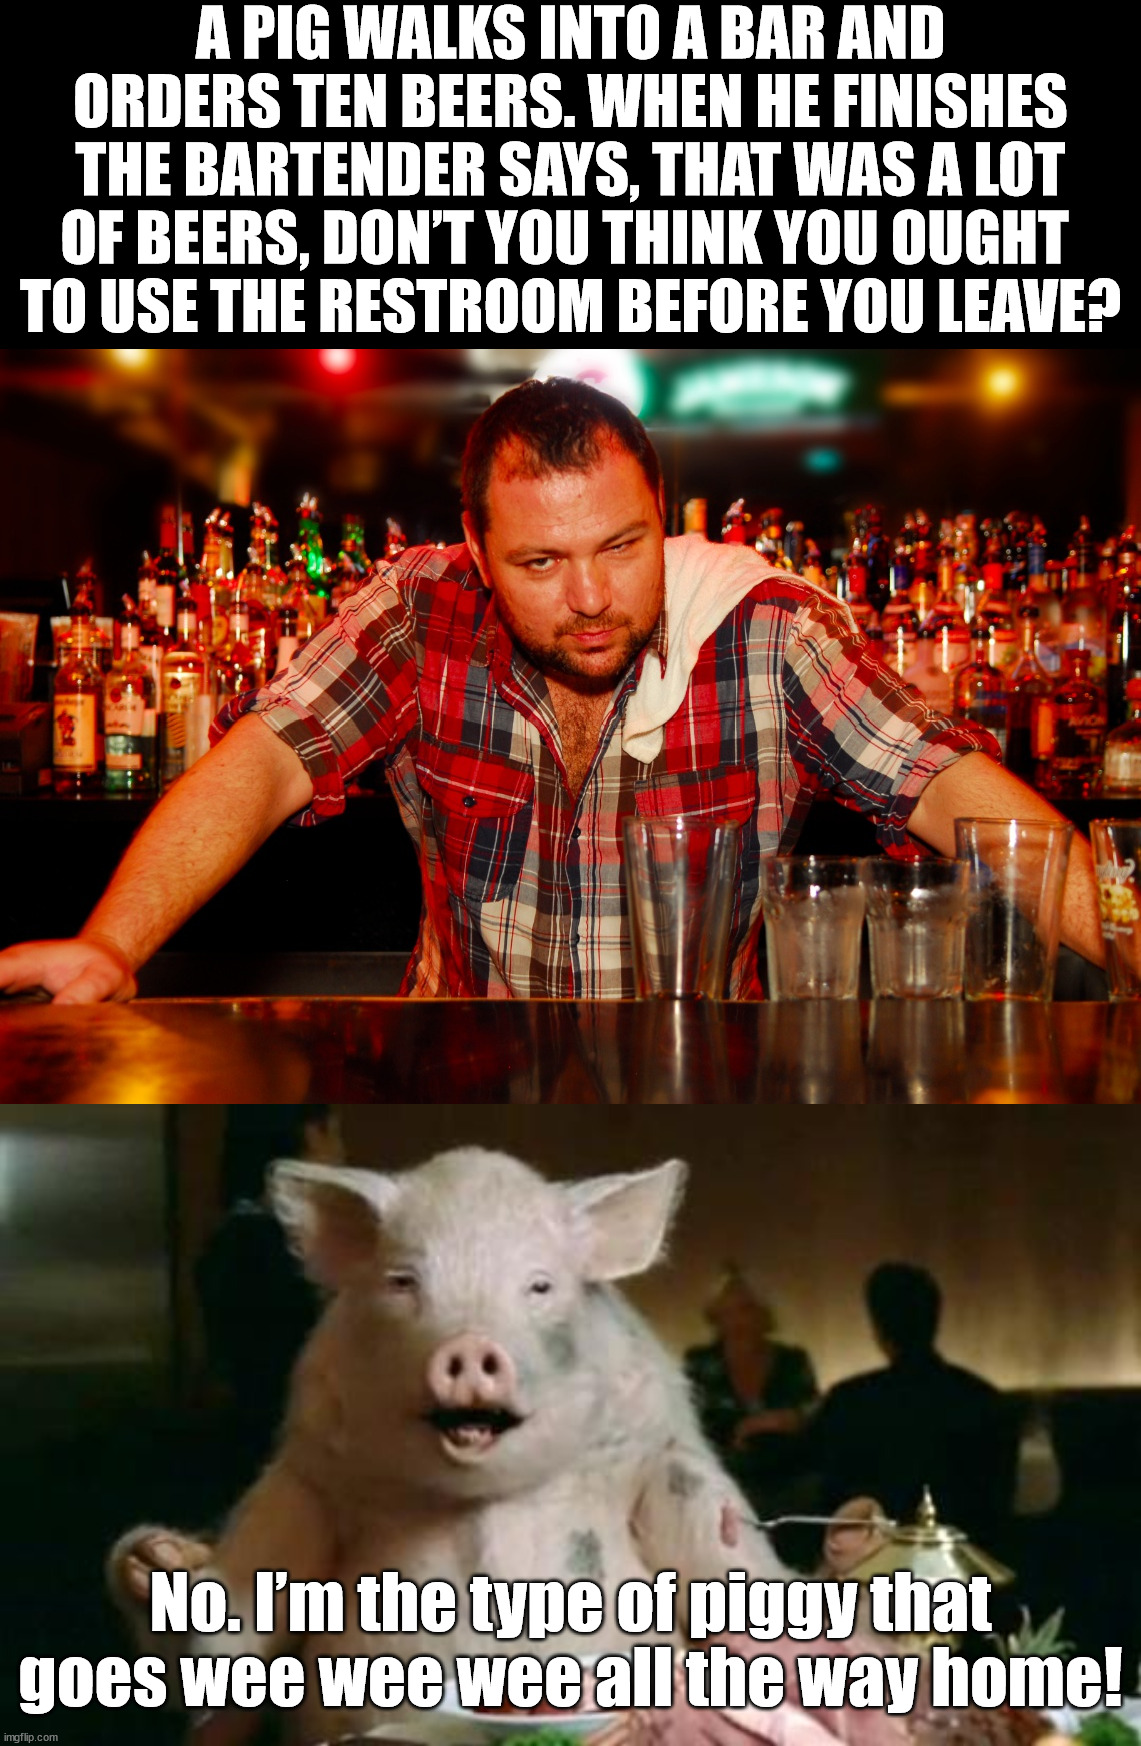 A PIG WALKS INTO A BAR AND ORDERS TEN BEERS. WHEN HE FINISHES THE BARTENDER SAYS, THAT WAS A LOT OF BEERS, DON’T YOU THINK YOU OUGHT 
TO USE THE RESTROOM BEFORE YOU LEAVE? No. I’m the type of piggy that goes wee wee wee all the way home! | image tagged in annoyed bartender,pig eats ham,eyeroll | made w/ Imgflip meme maker